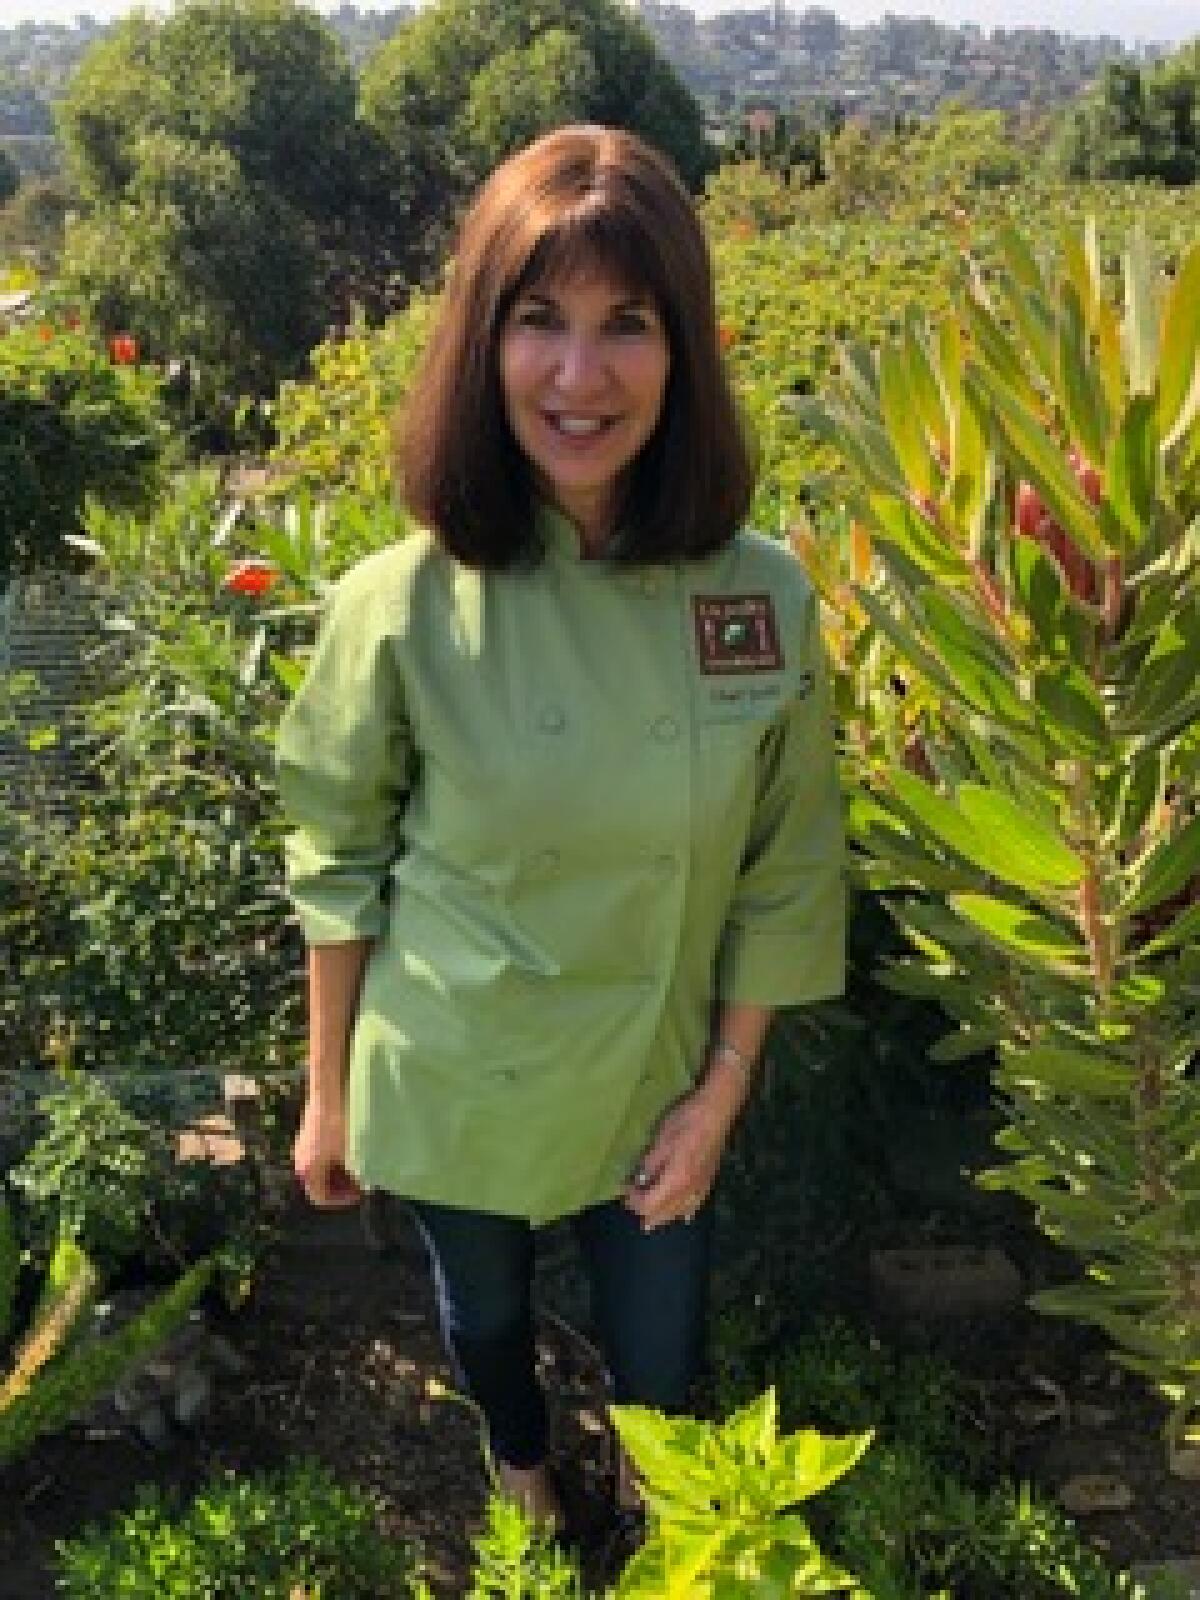 Lajollacooks4u founder and chef Jodi Abel will help lead a virtual cooking event from 5:30 to 6:30 p.m. Thursday, Aug. 6.